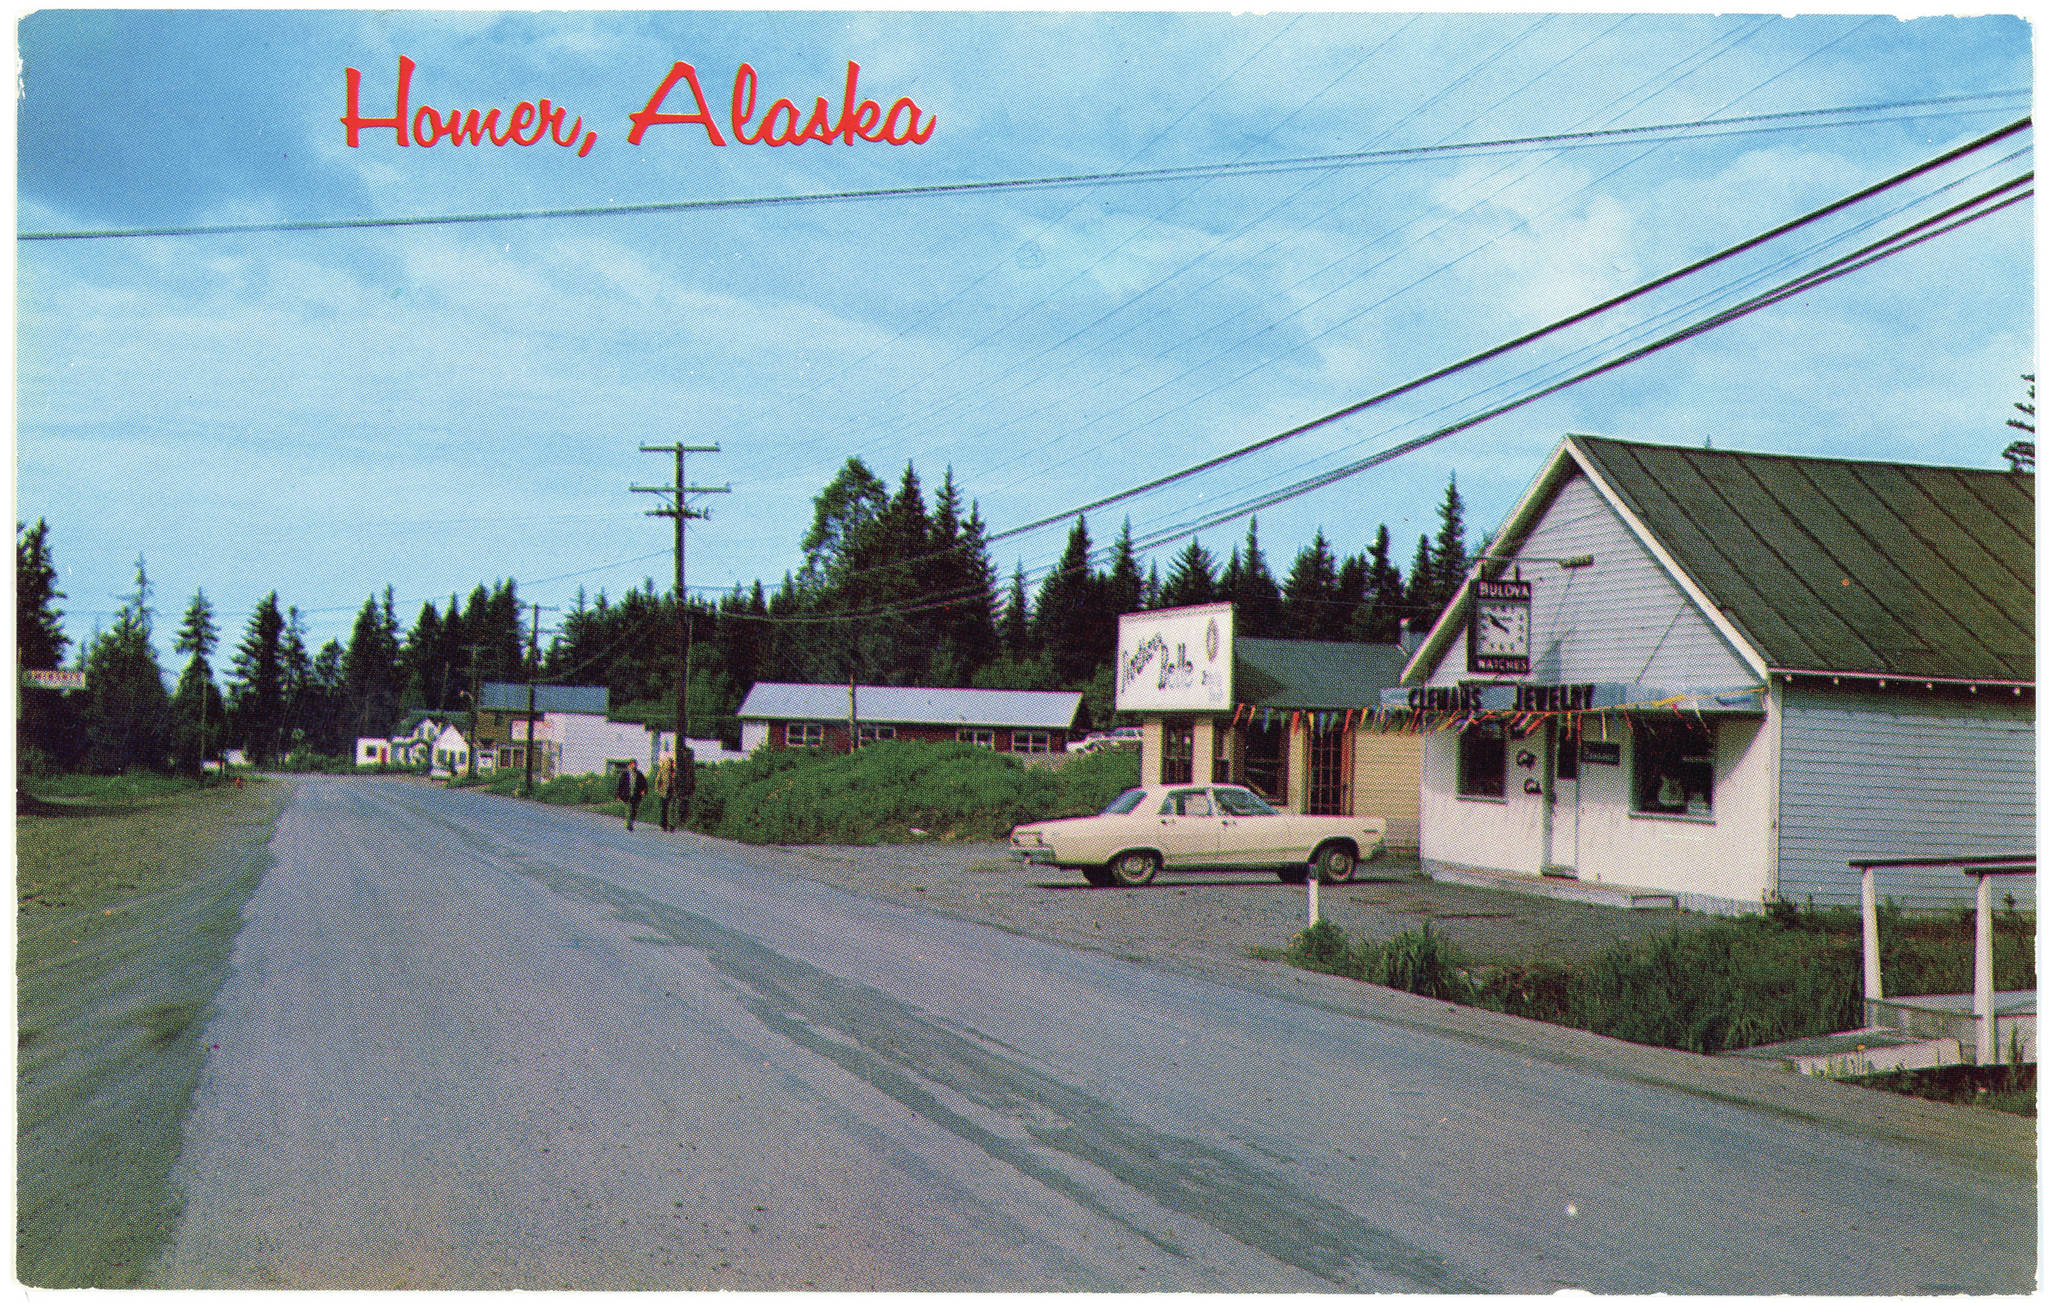 An undated postcard shows Pioneer Avenue looking west in Homer, Alaska, before it was paved. The building on the right is the former Homer Women’s Club which later became the Homer News and then Cafe Cups. The remodeled building is now Little Mermaid Restaurant. The postcard is included in the museum’s “Greetings from the Past: History in Postcards” exhibit that opened Thursday, Oct. 22, 2020, in Homer, Alaska. (Photo courtesy Pratt Museum from its collection)